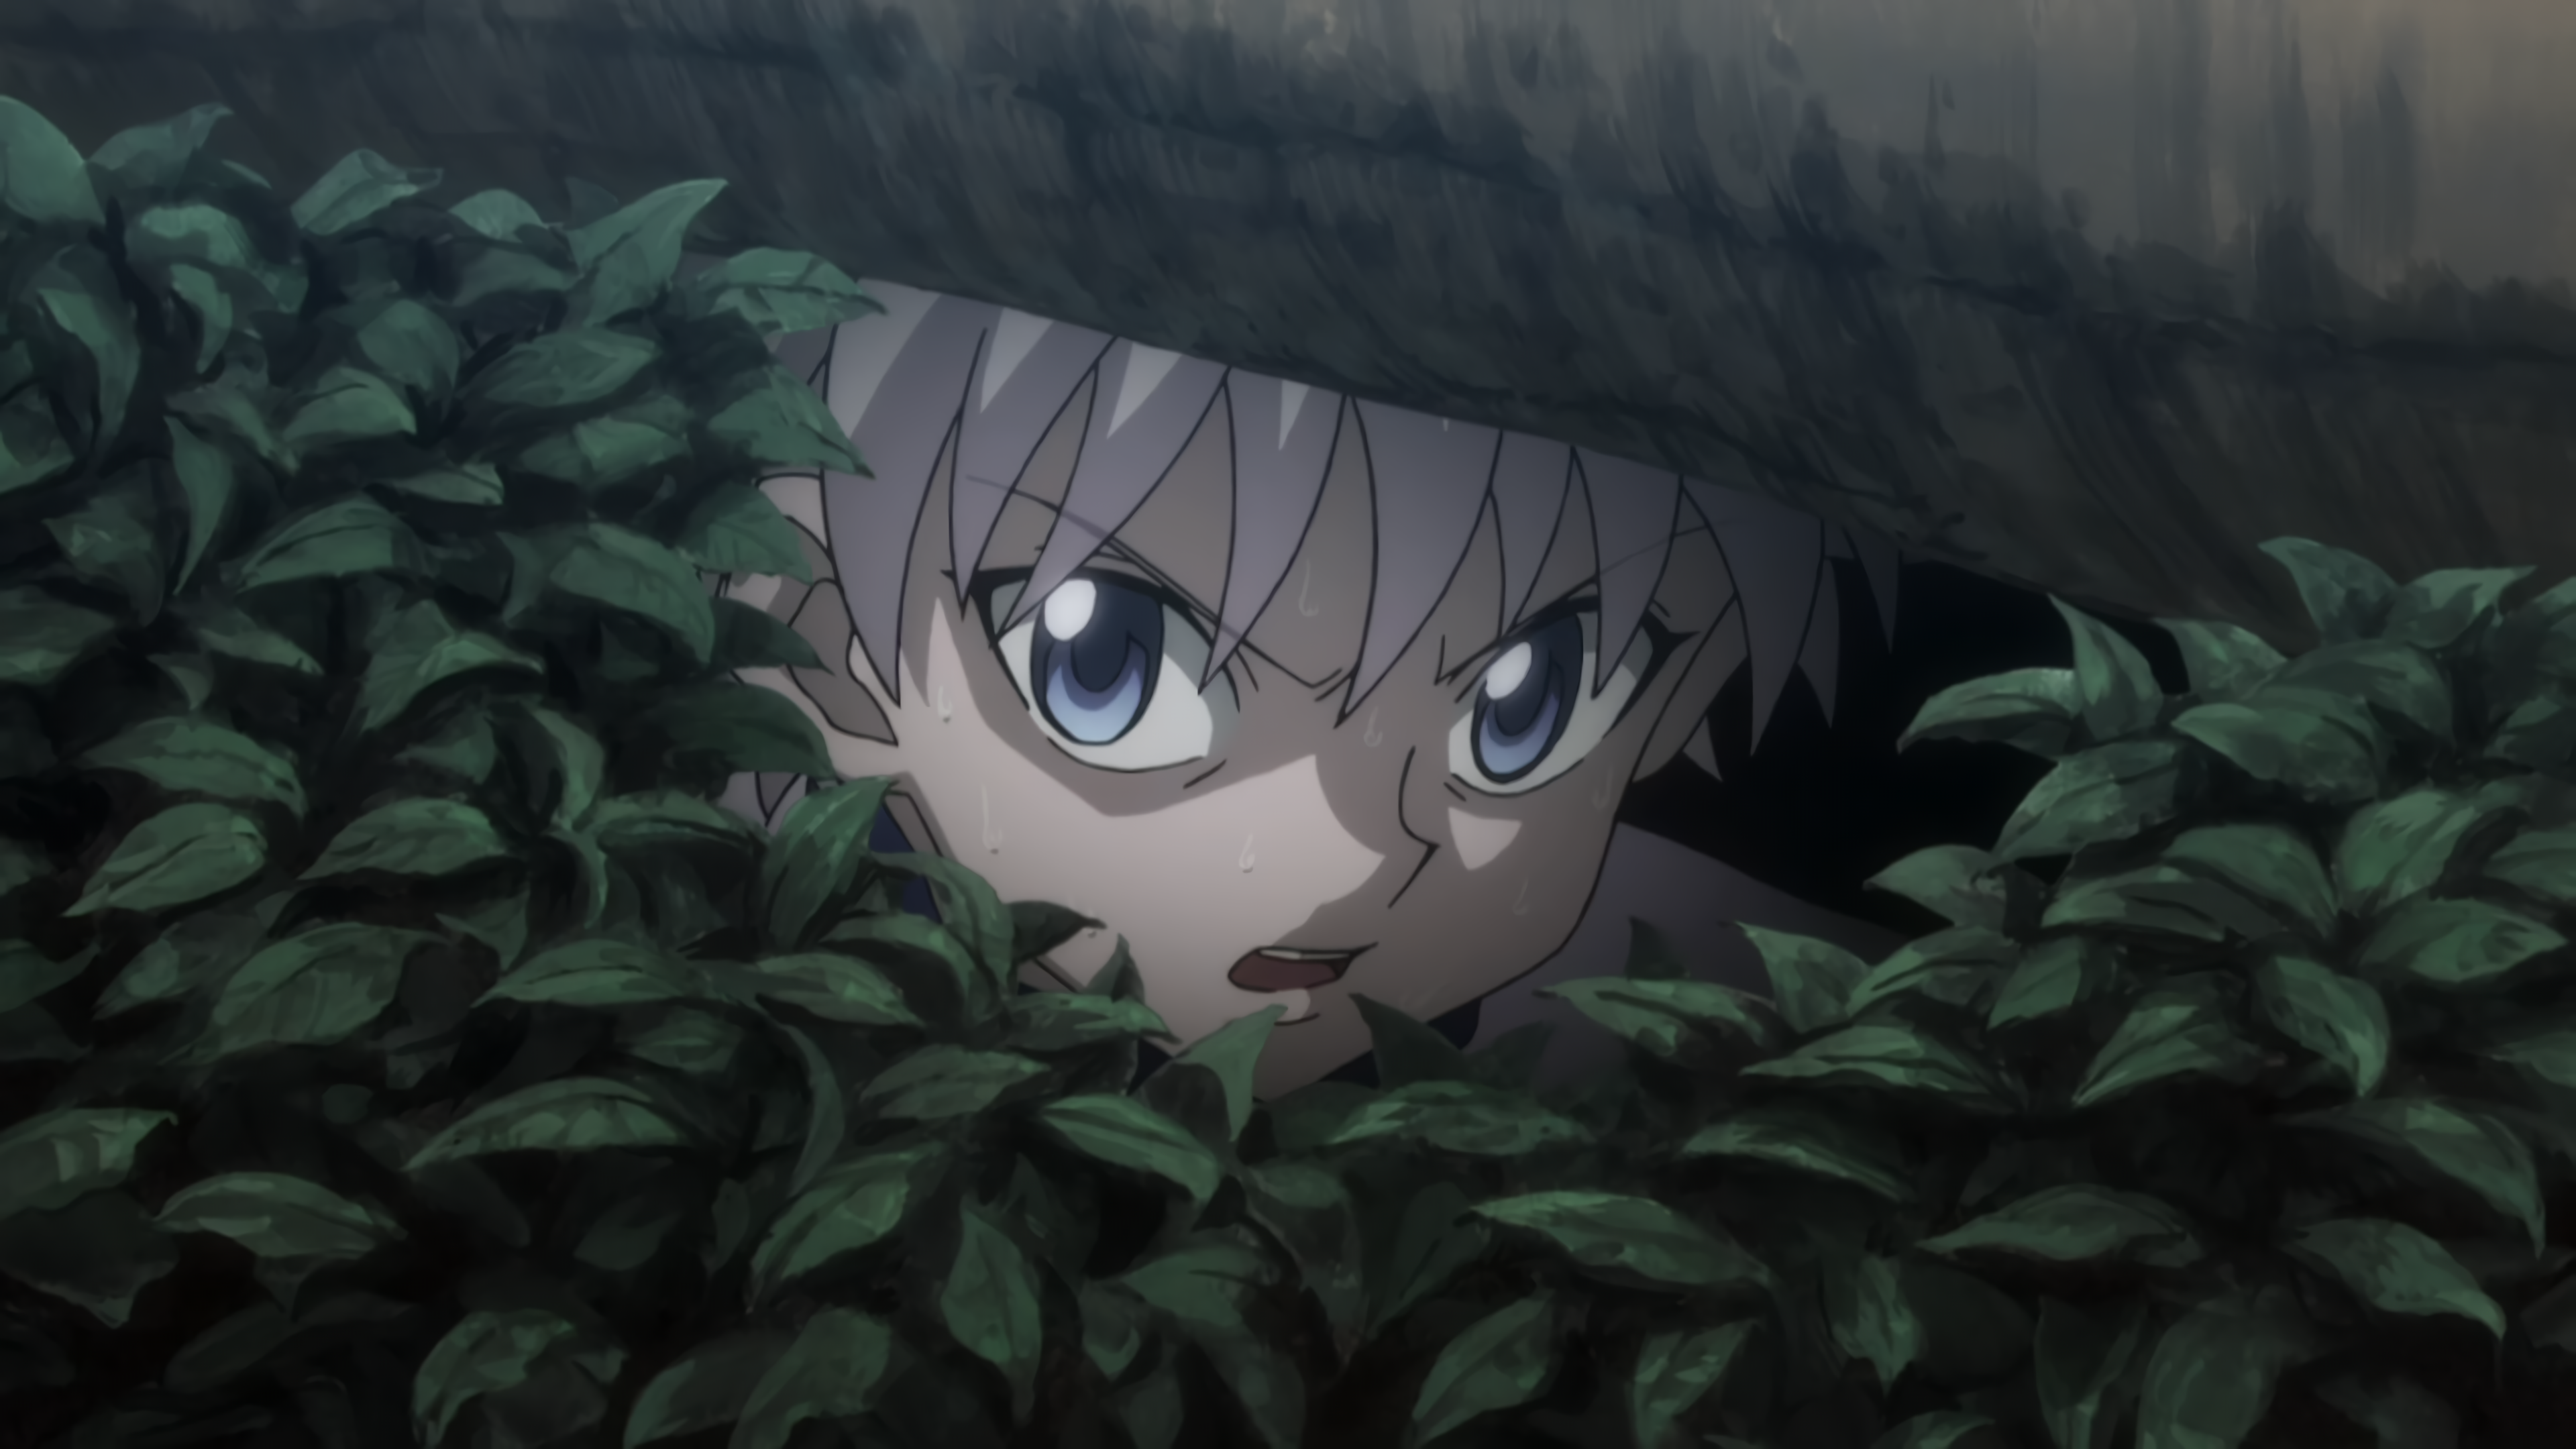 Hunter x Hunter 116 – You Won't Believe How Far Back You Need to Go to Find  a Better Single Episode of Anime